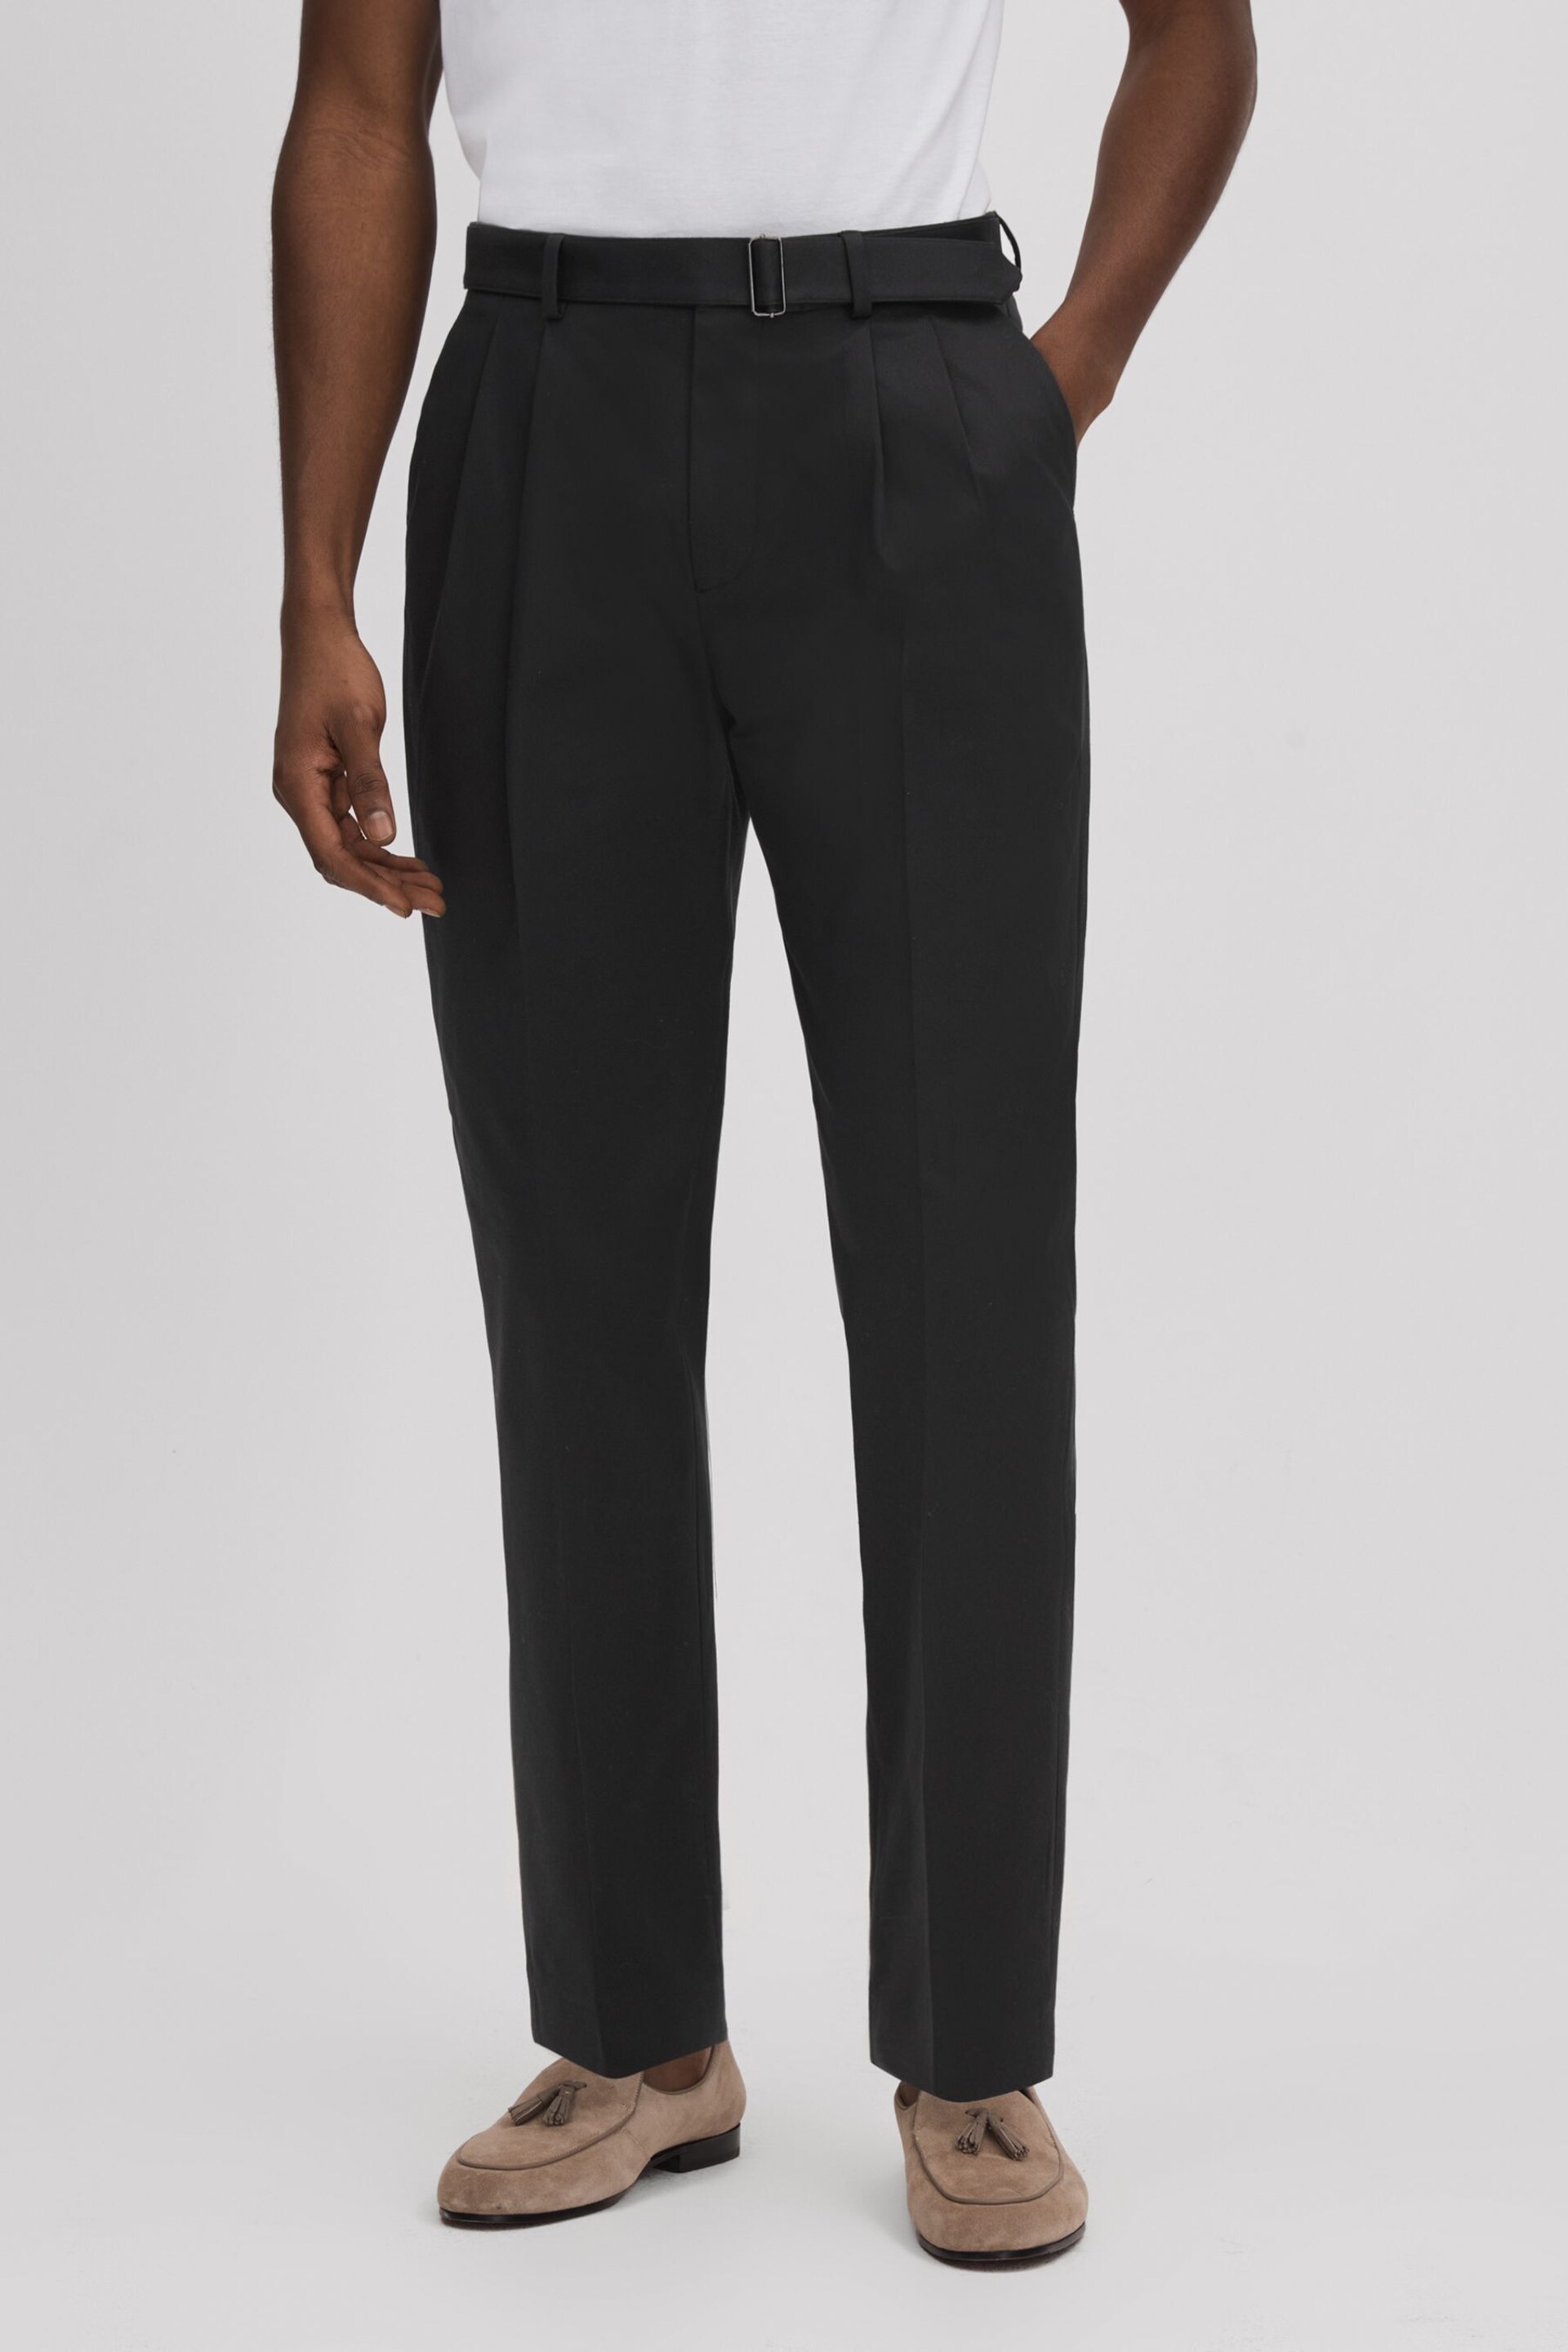 Reiss Black Liquid Relaxed Tapered Belted Trousers - Image 1 of 5